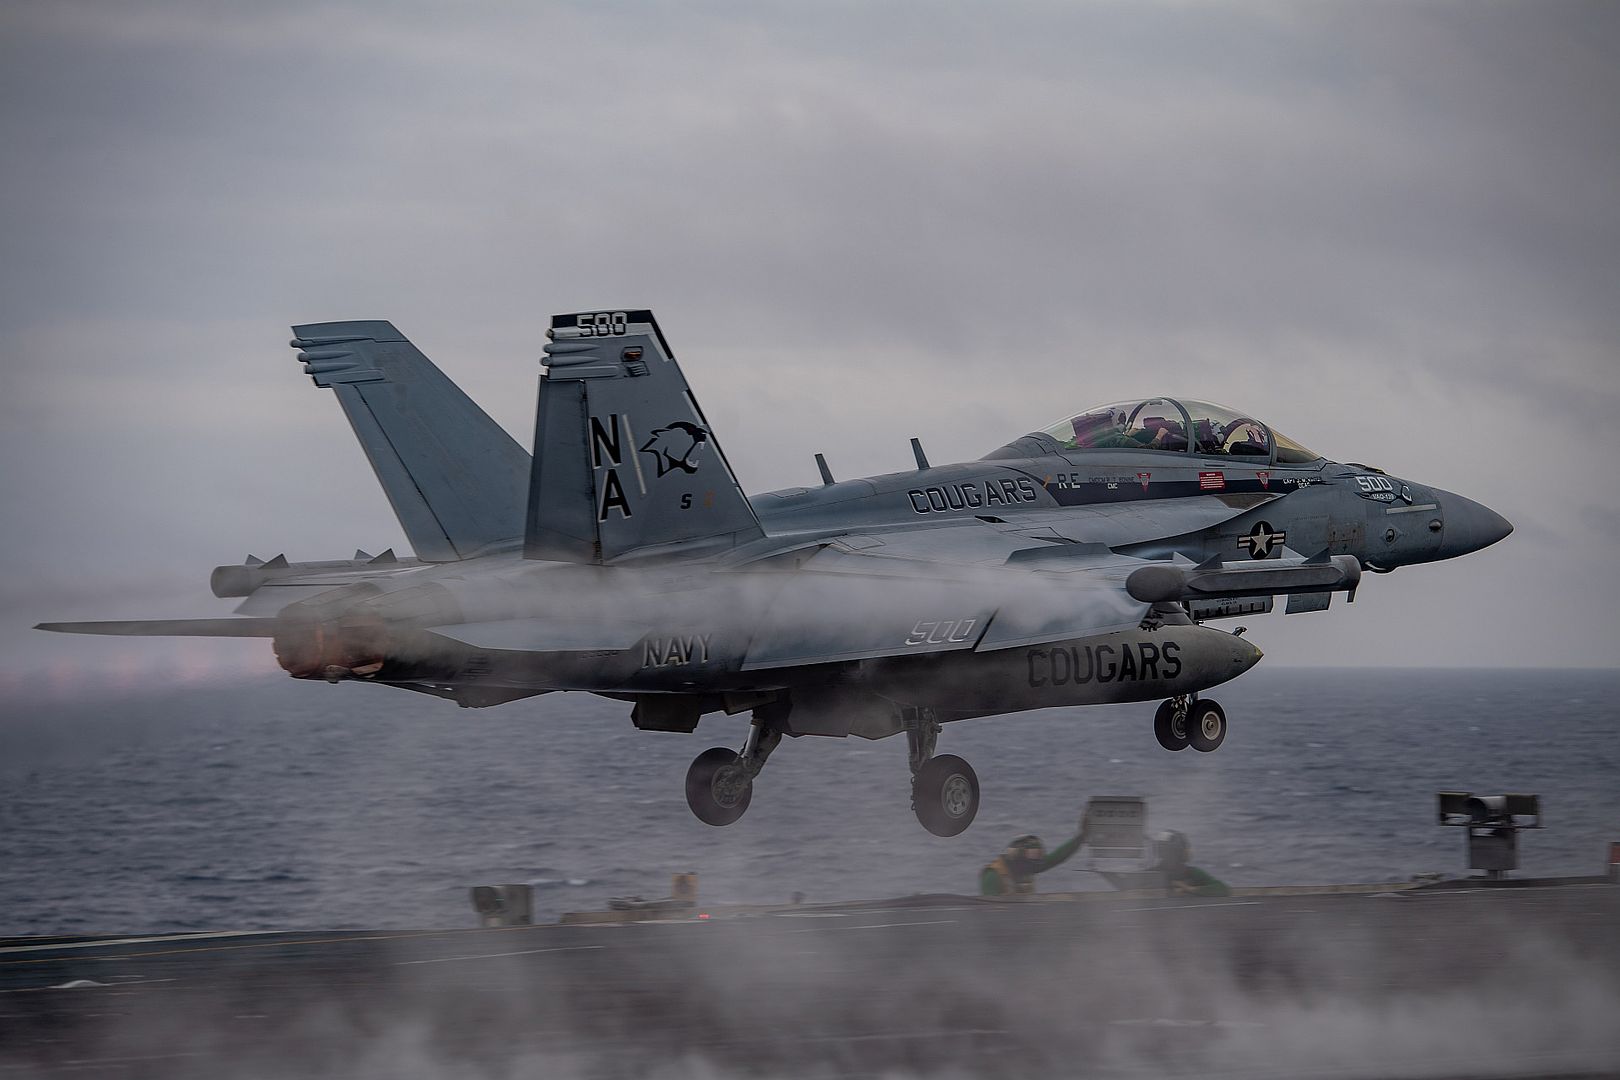  139 Launches From The Aircraft Carrier USS Nimitz